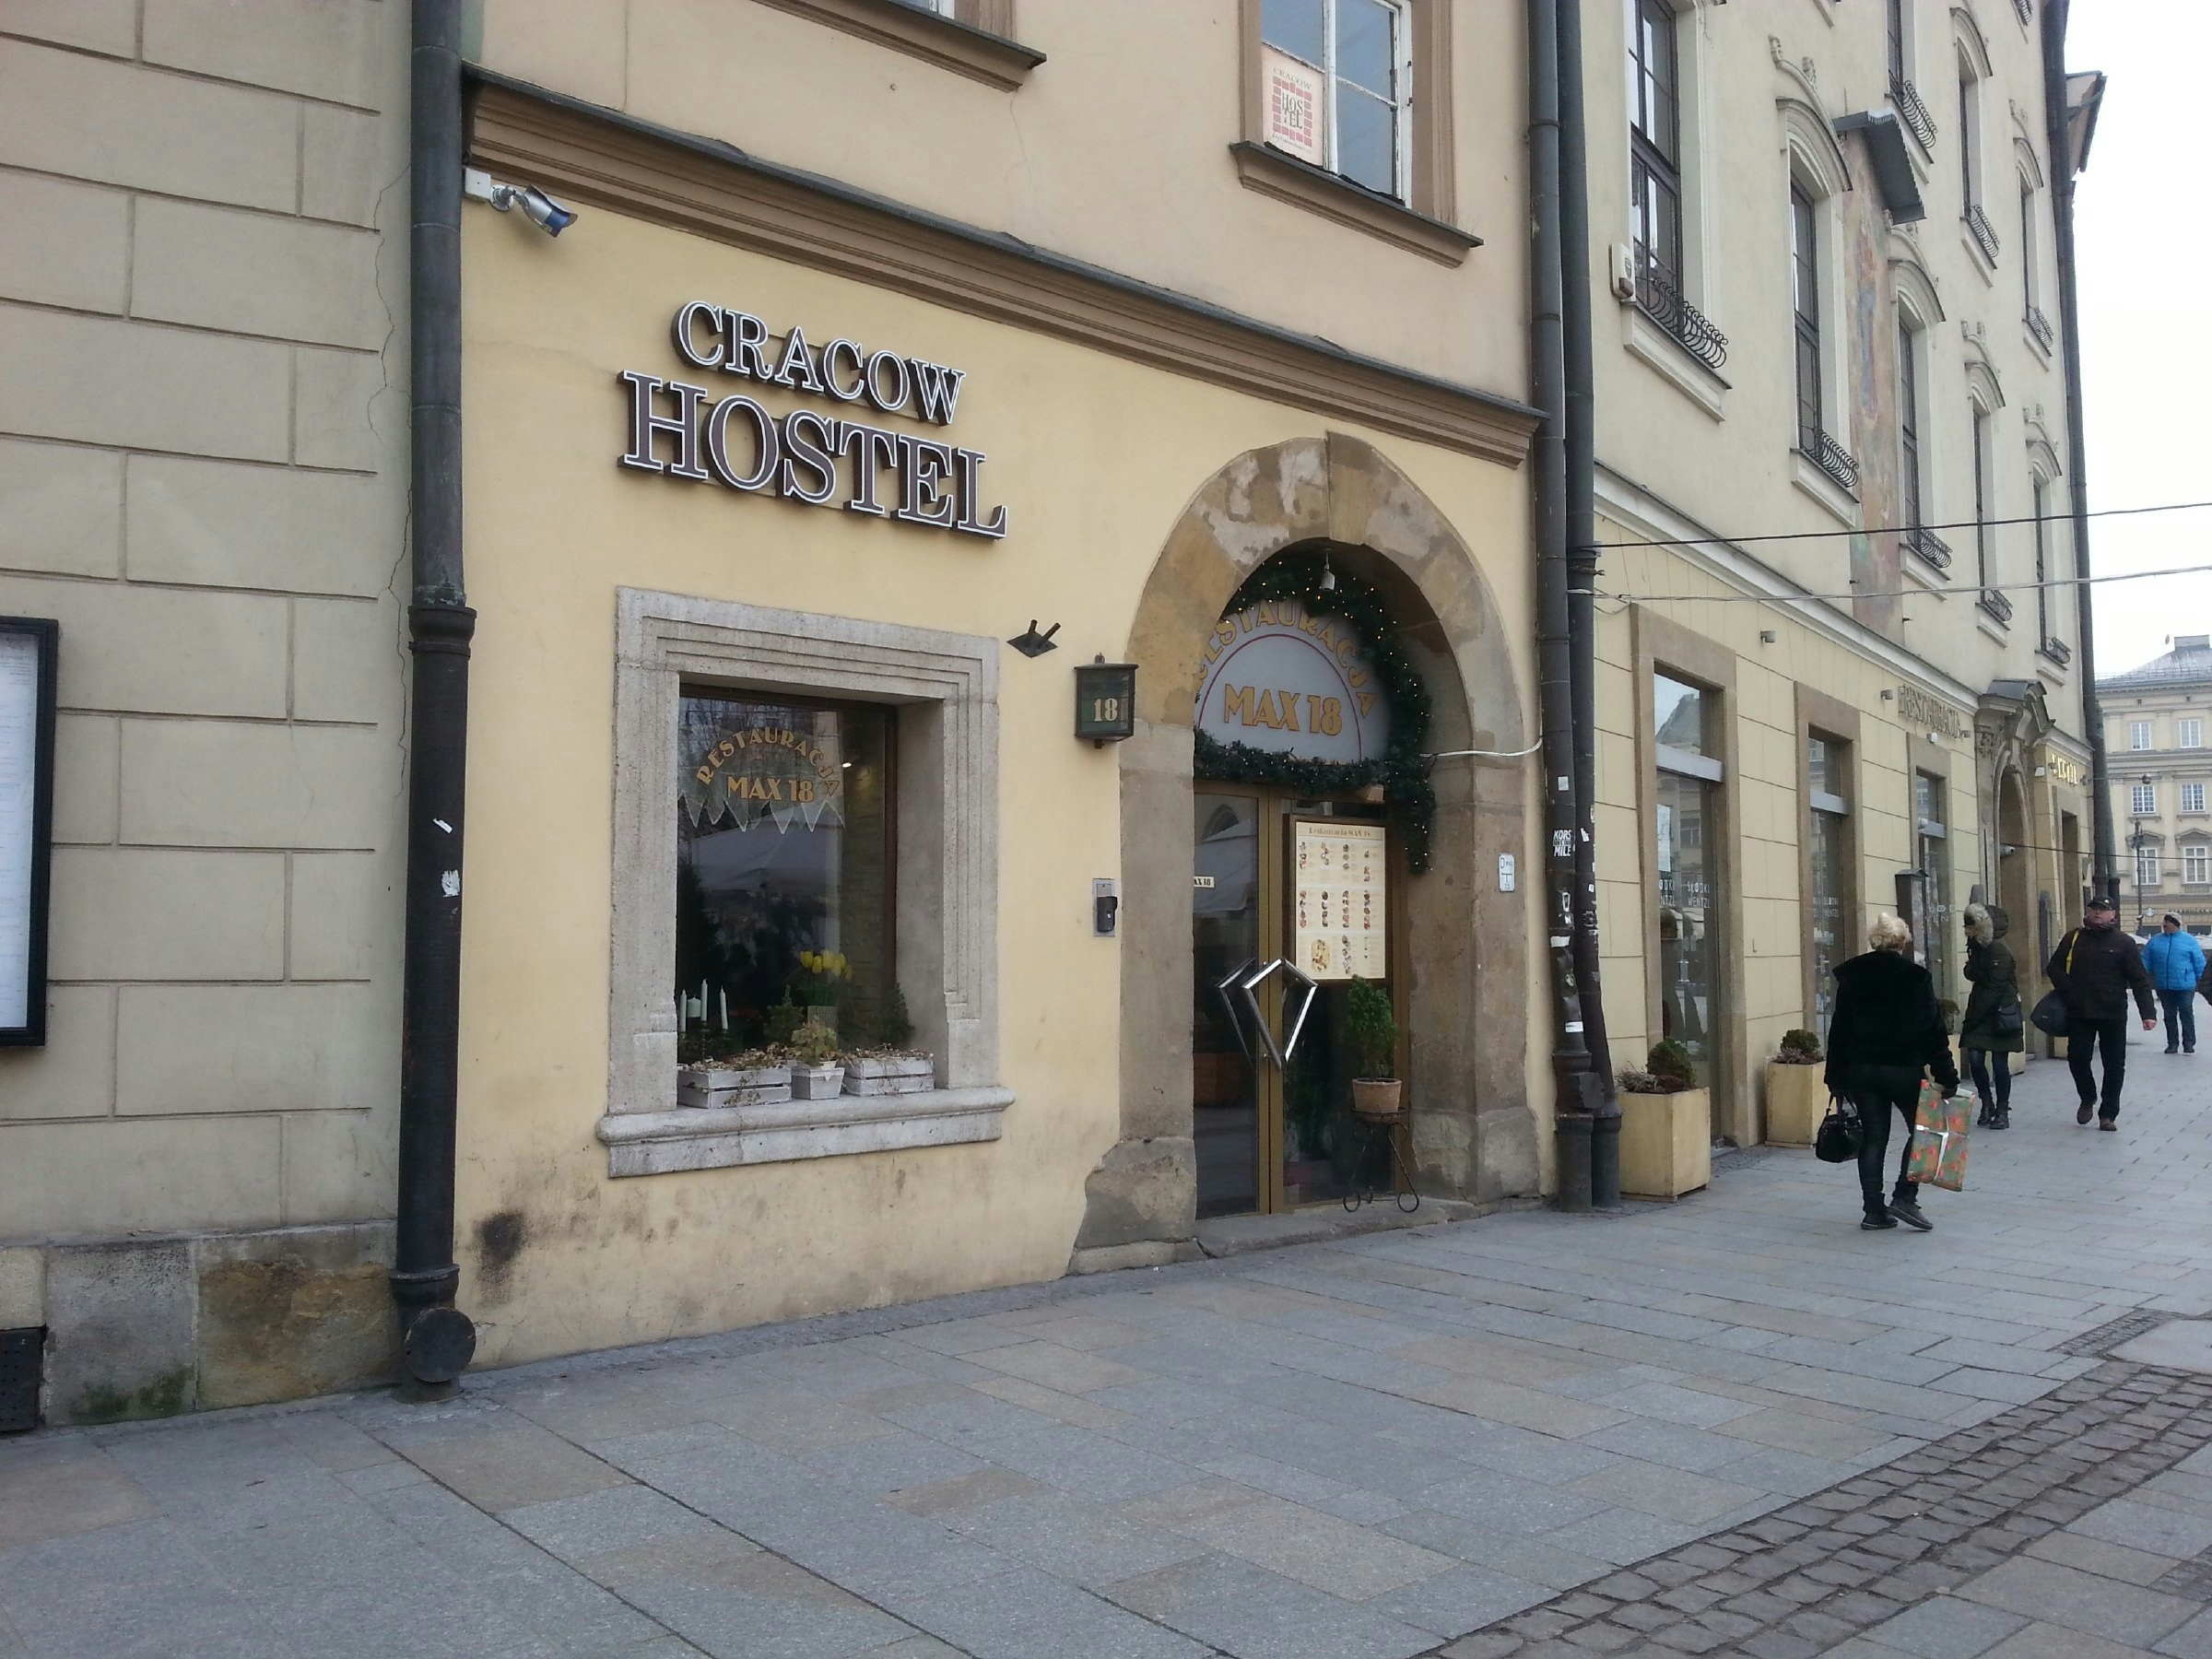 Cracow Hostel, in the corner of the market square lies this hostel in a convenient spot.